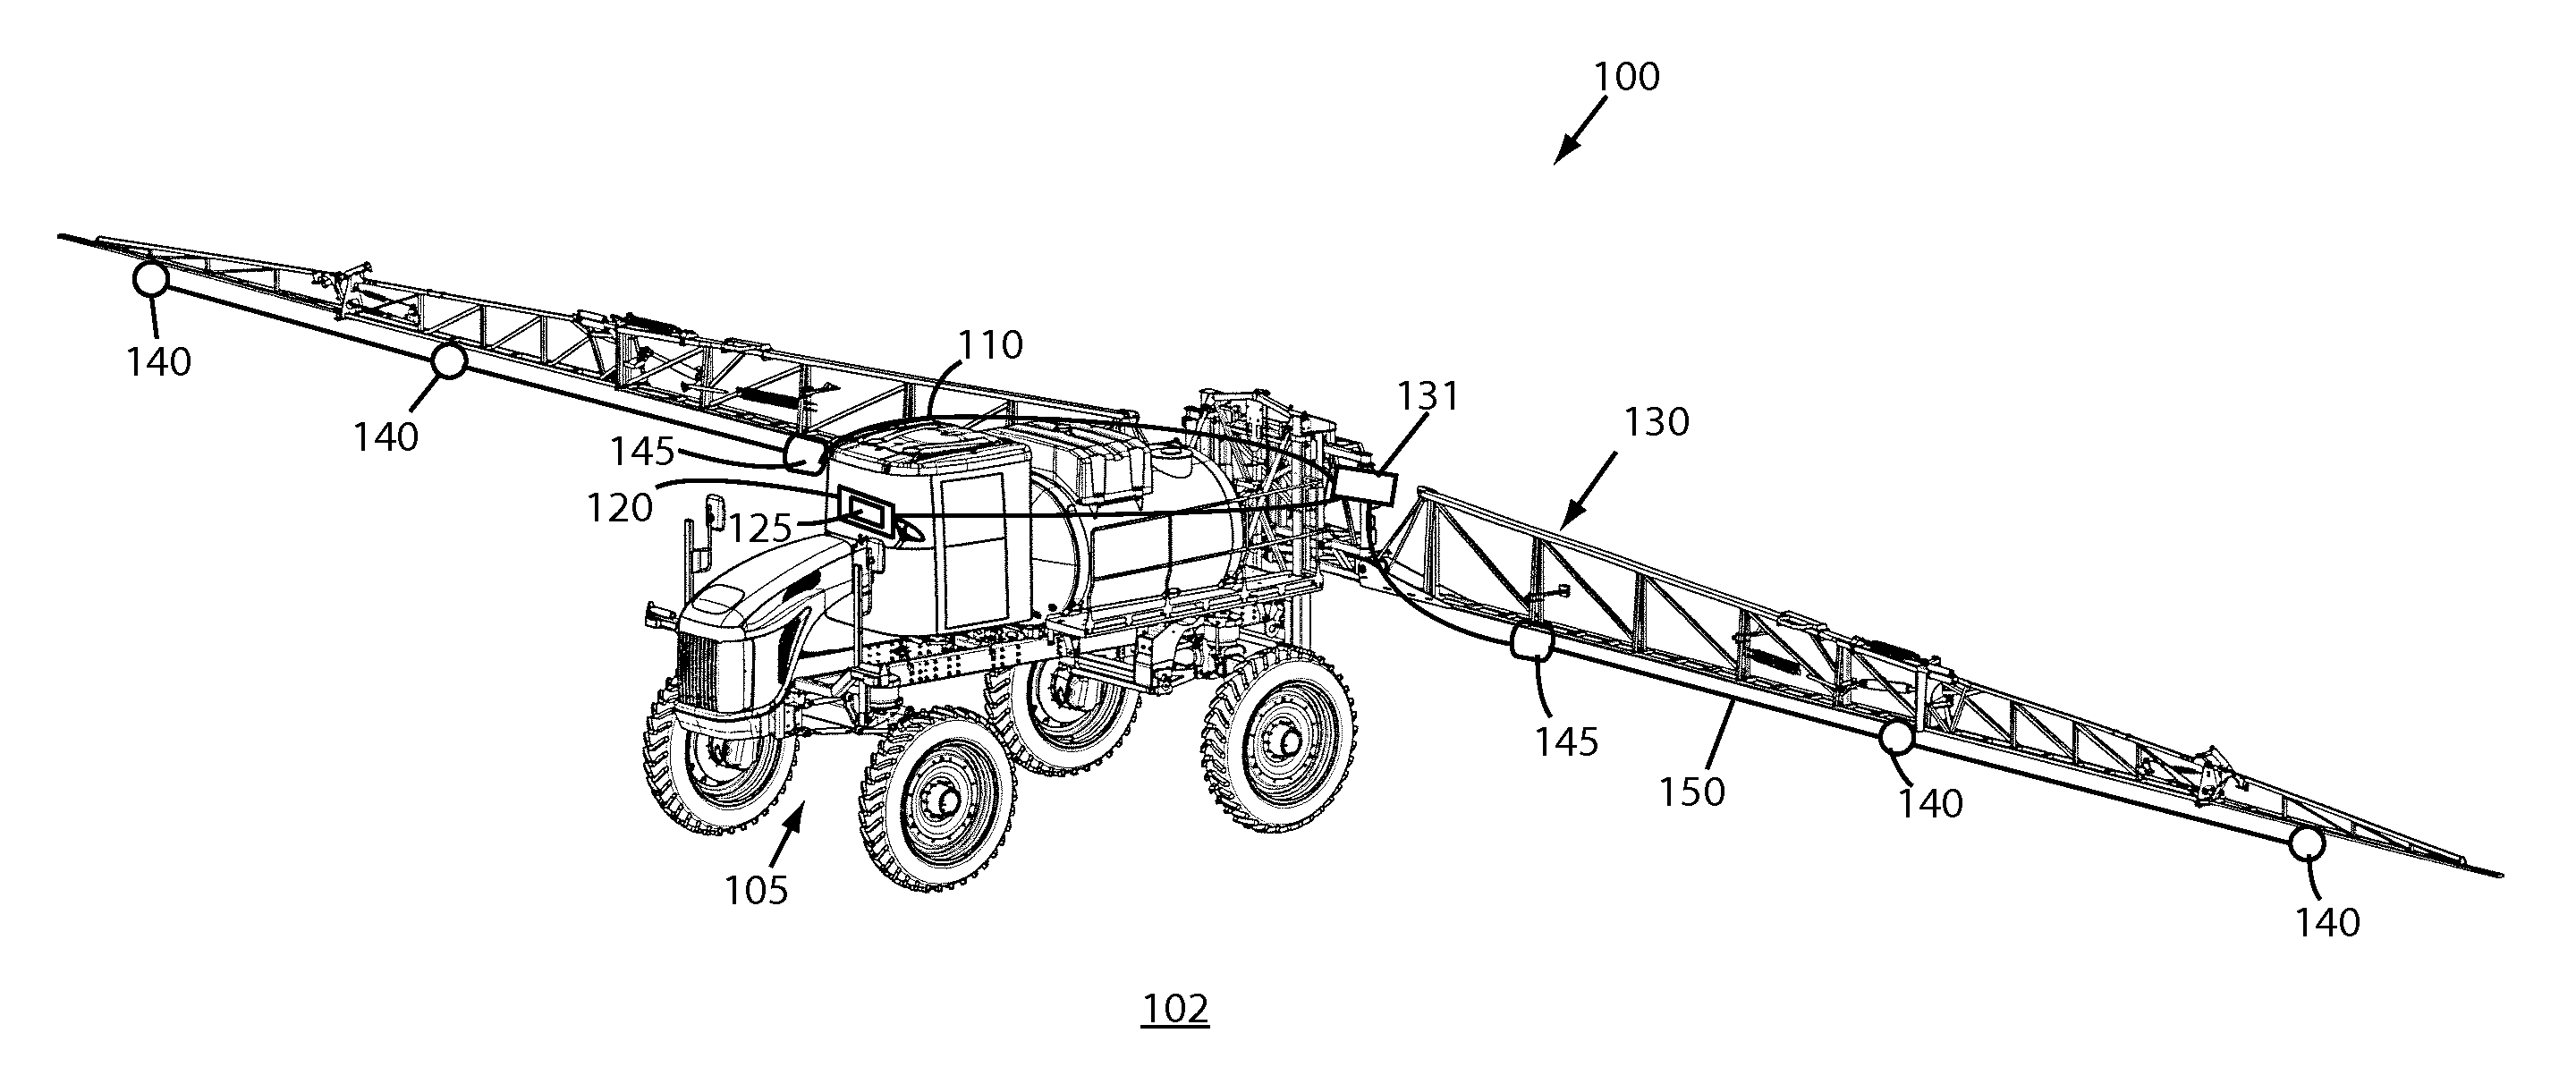 Method to Enhance Performance of Sensor-Based Implement Height Control